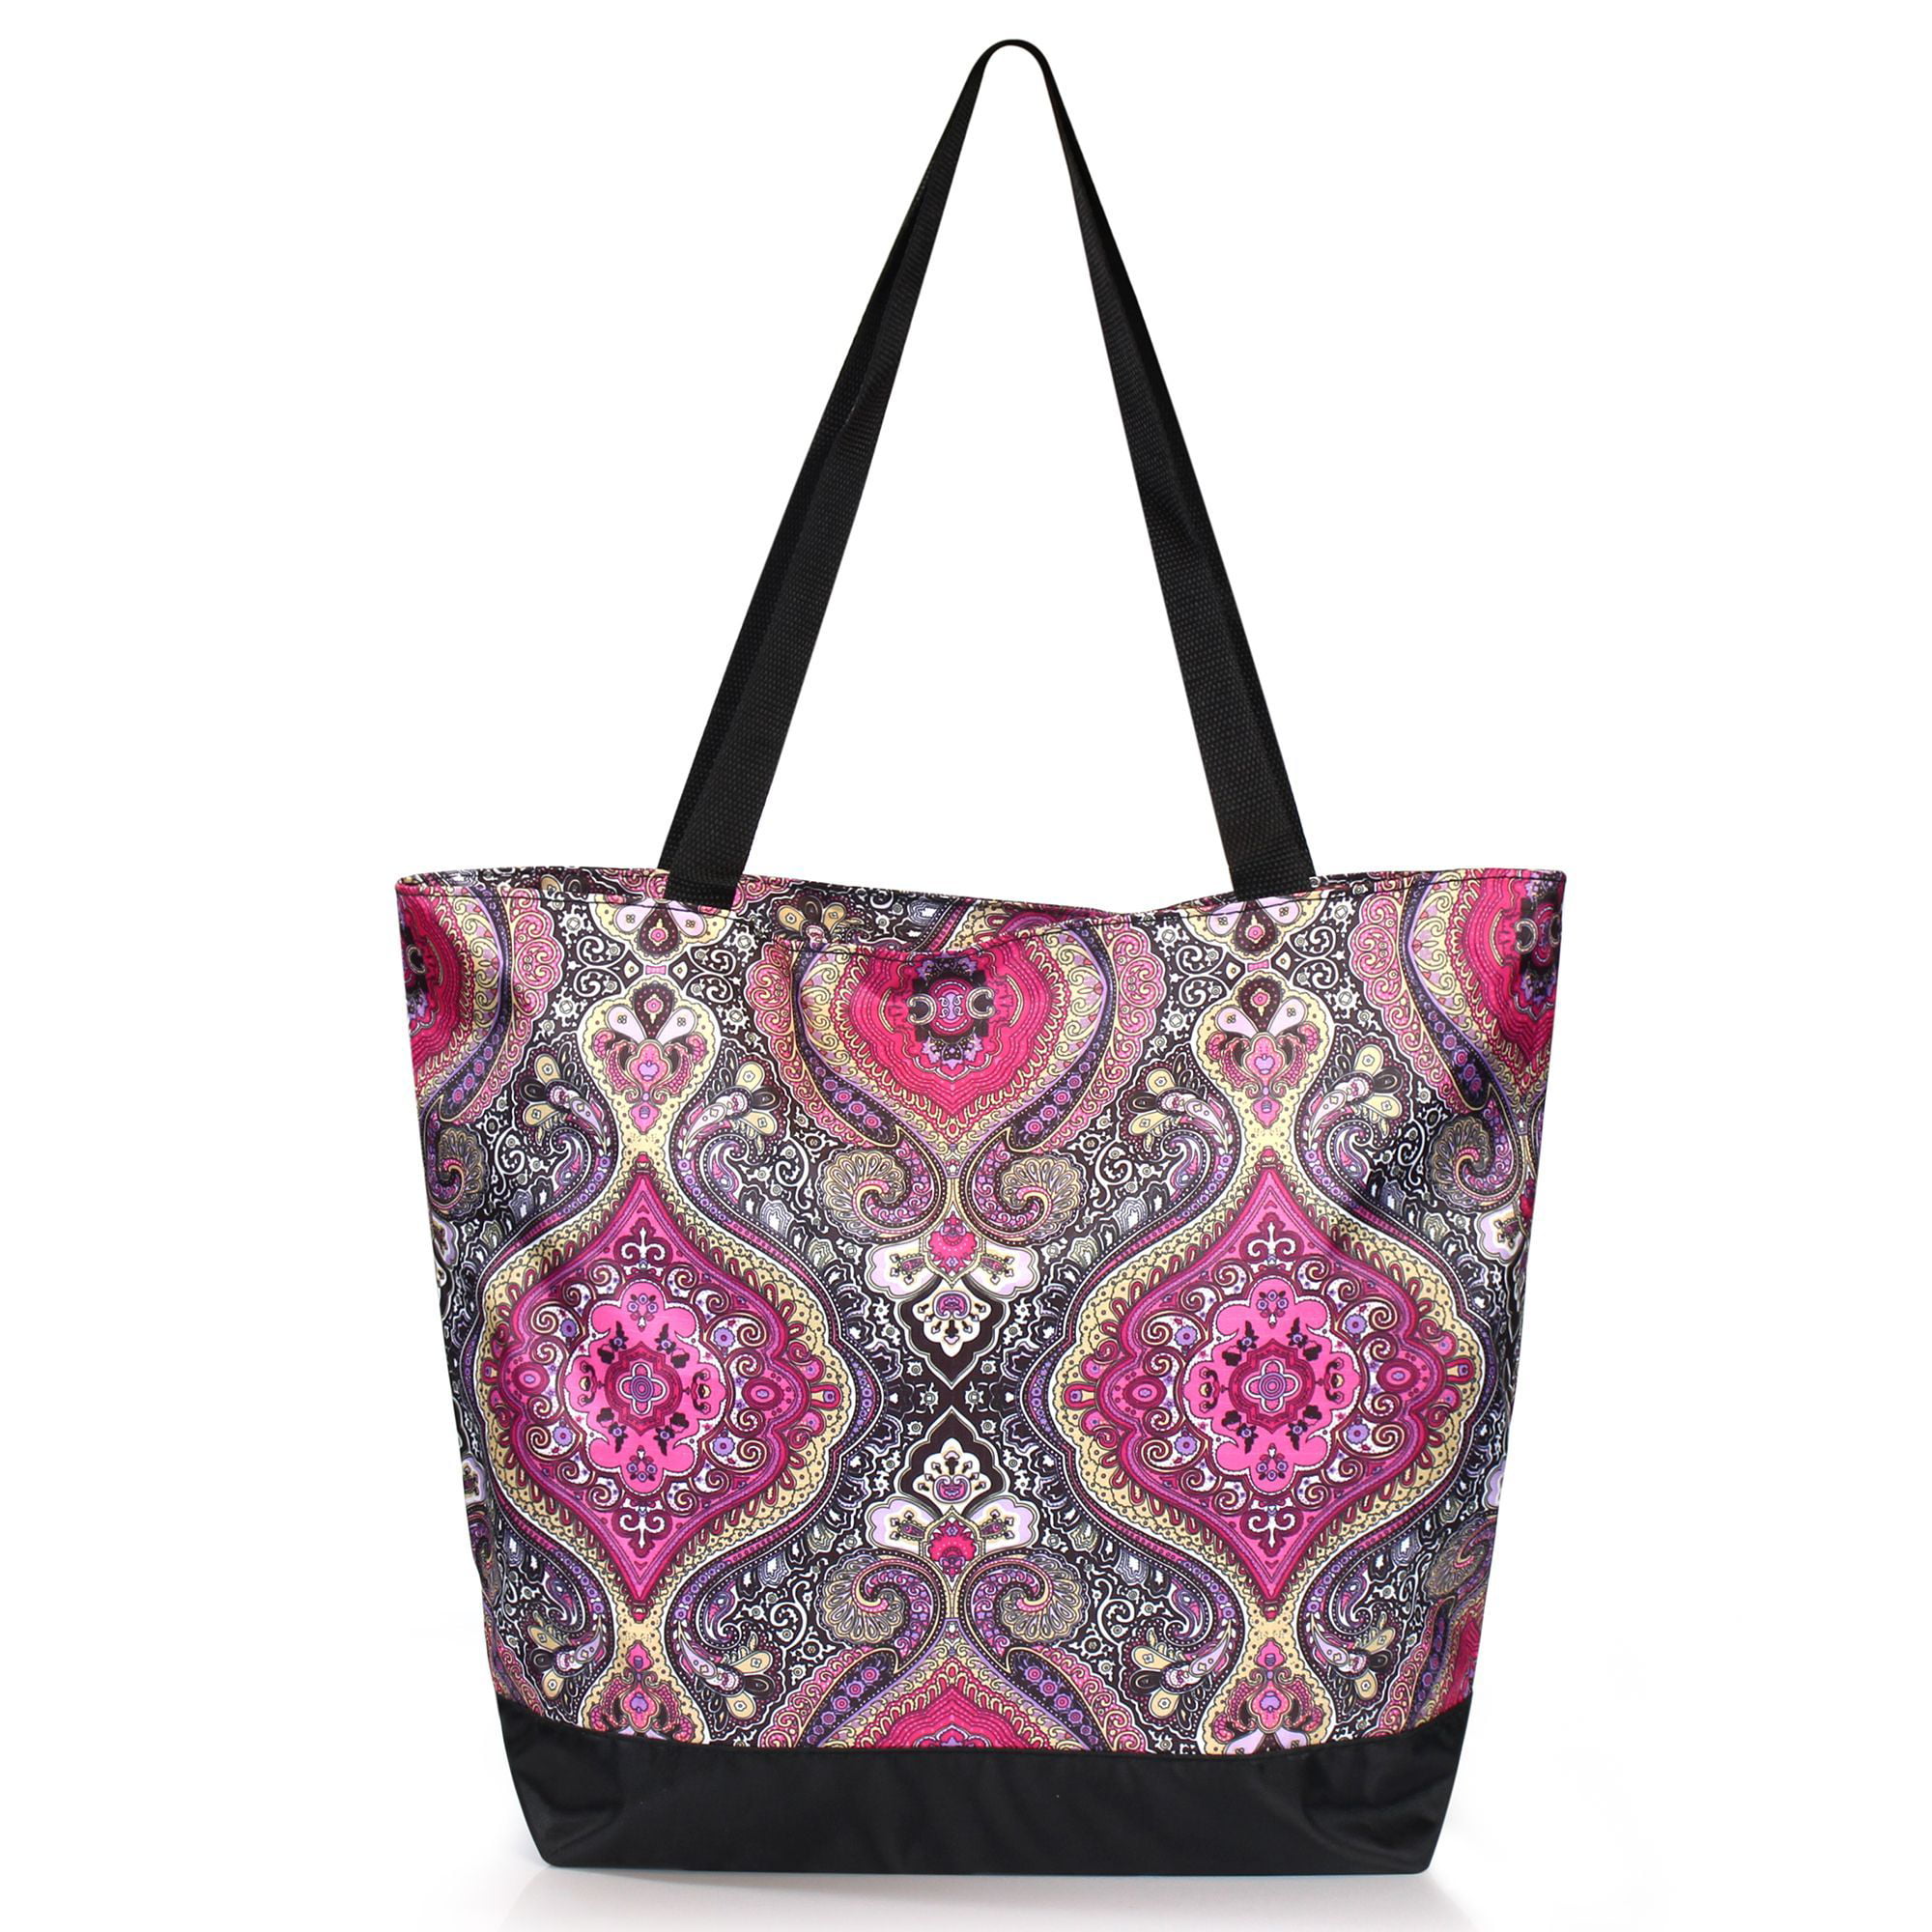 zippered tote bags for travel